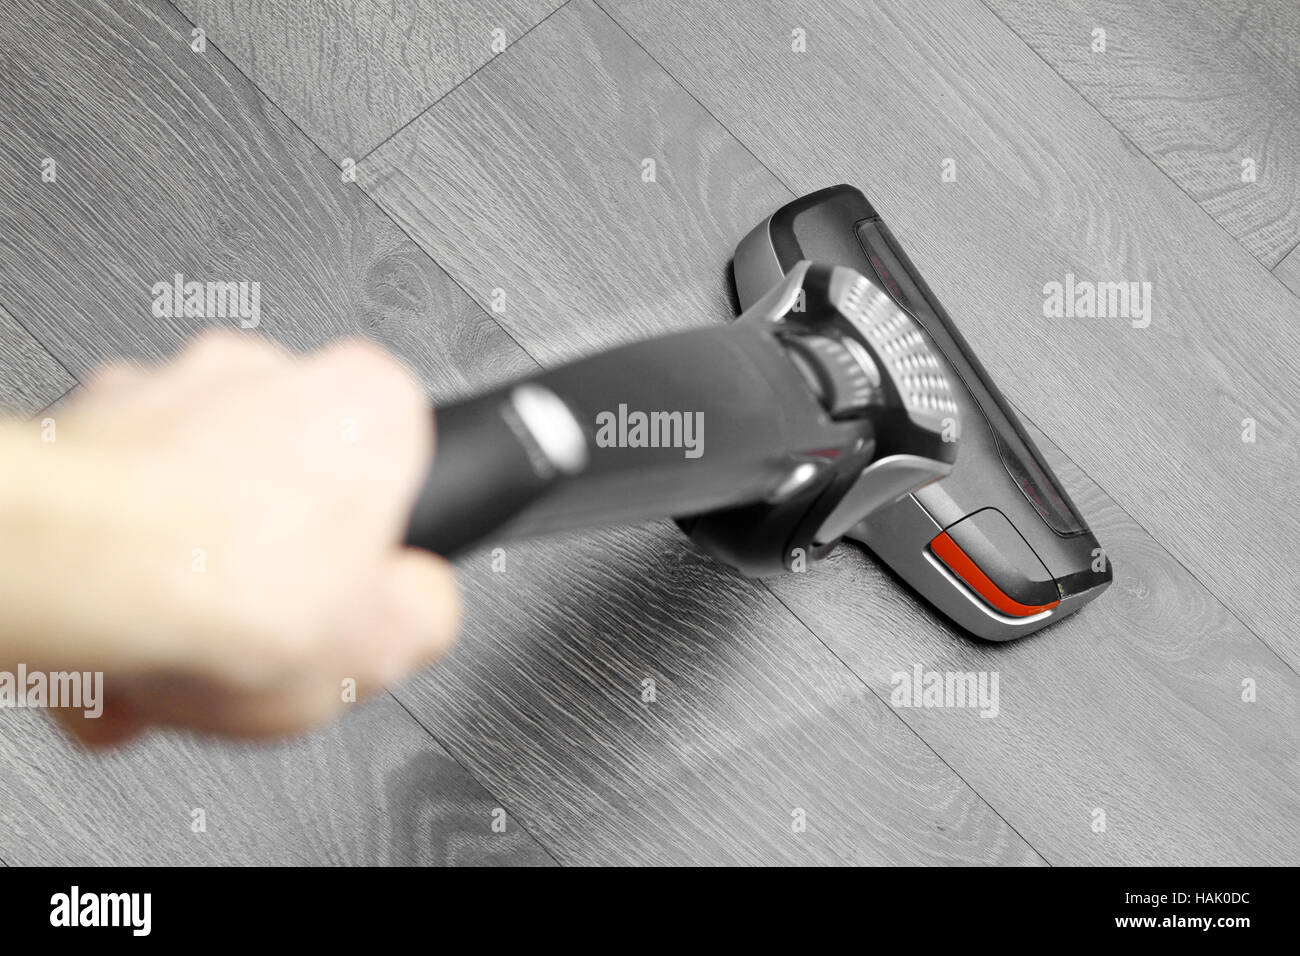 cleaning floor with cordless vacuum cleaner Stock Photo